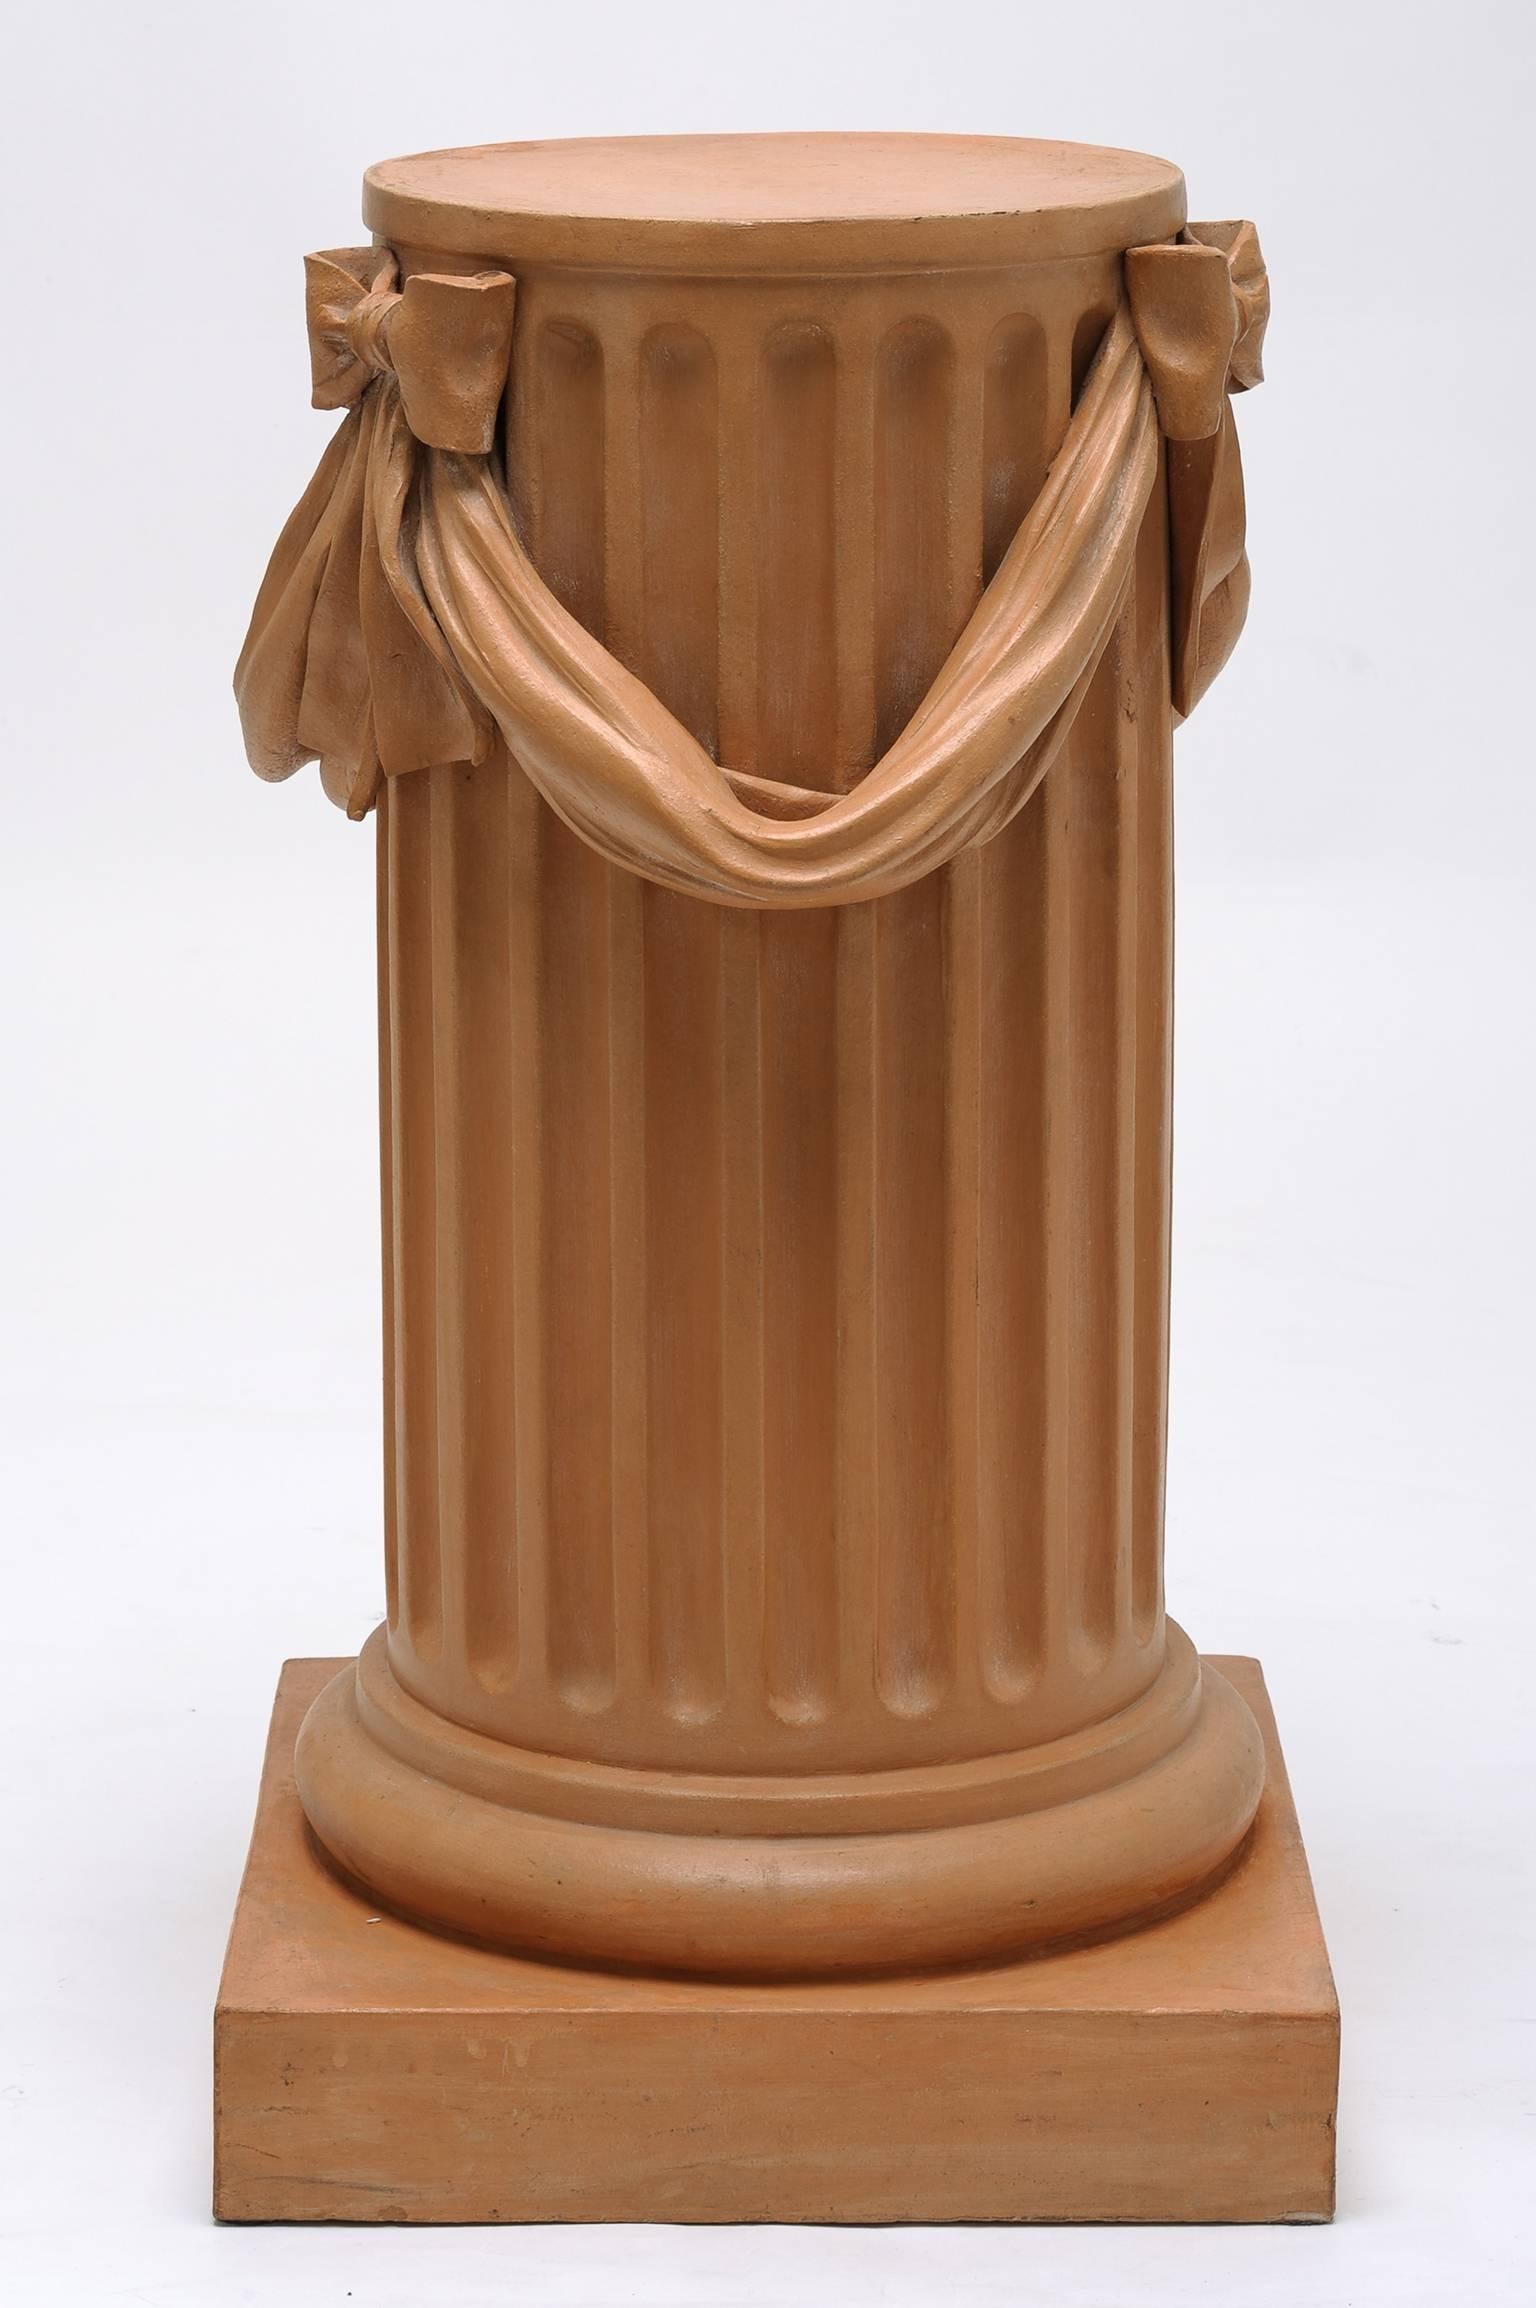 Hand-Crafted Tuscan Terracotta Column